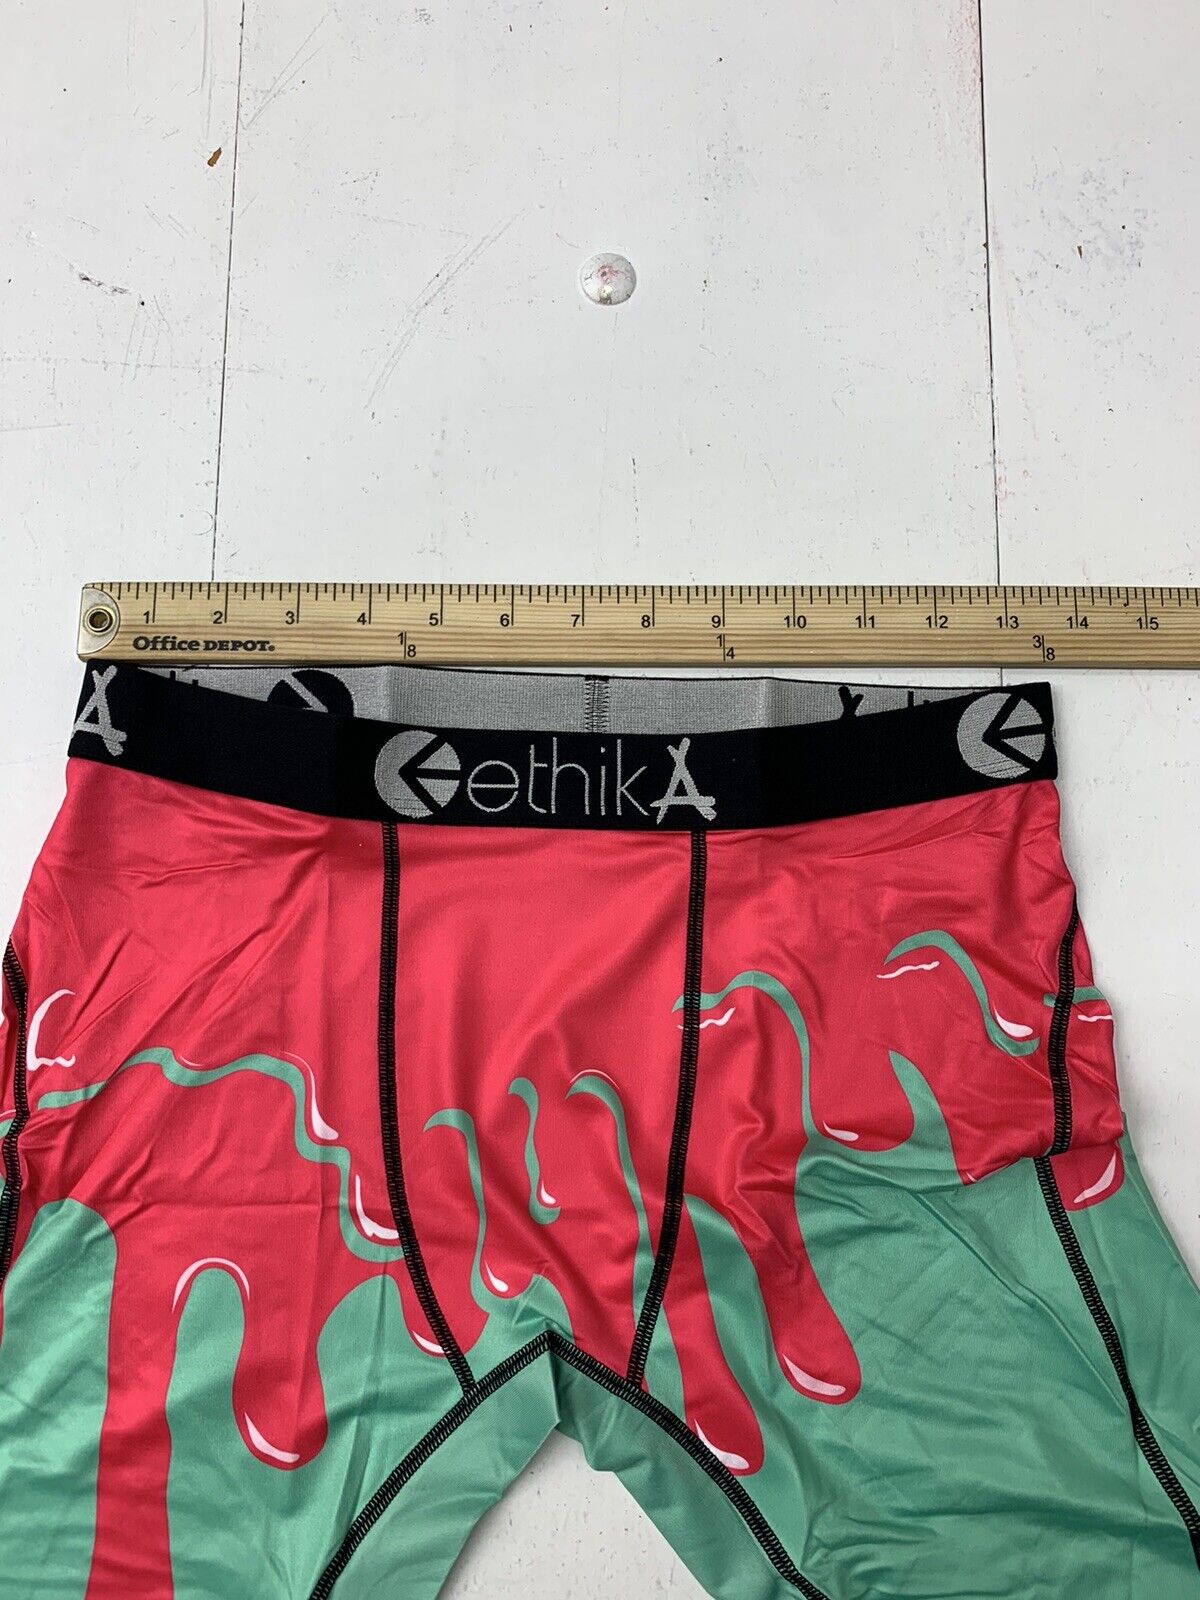 Ethika Underwear Company Collection